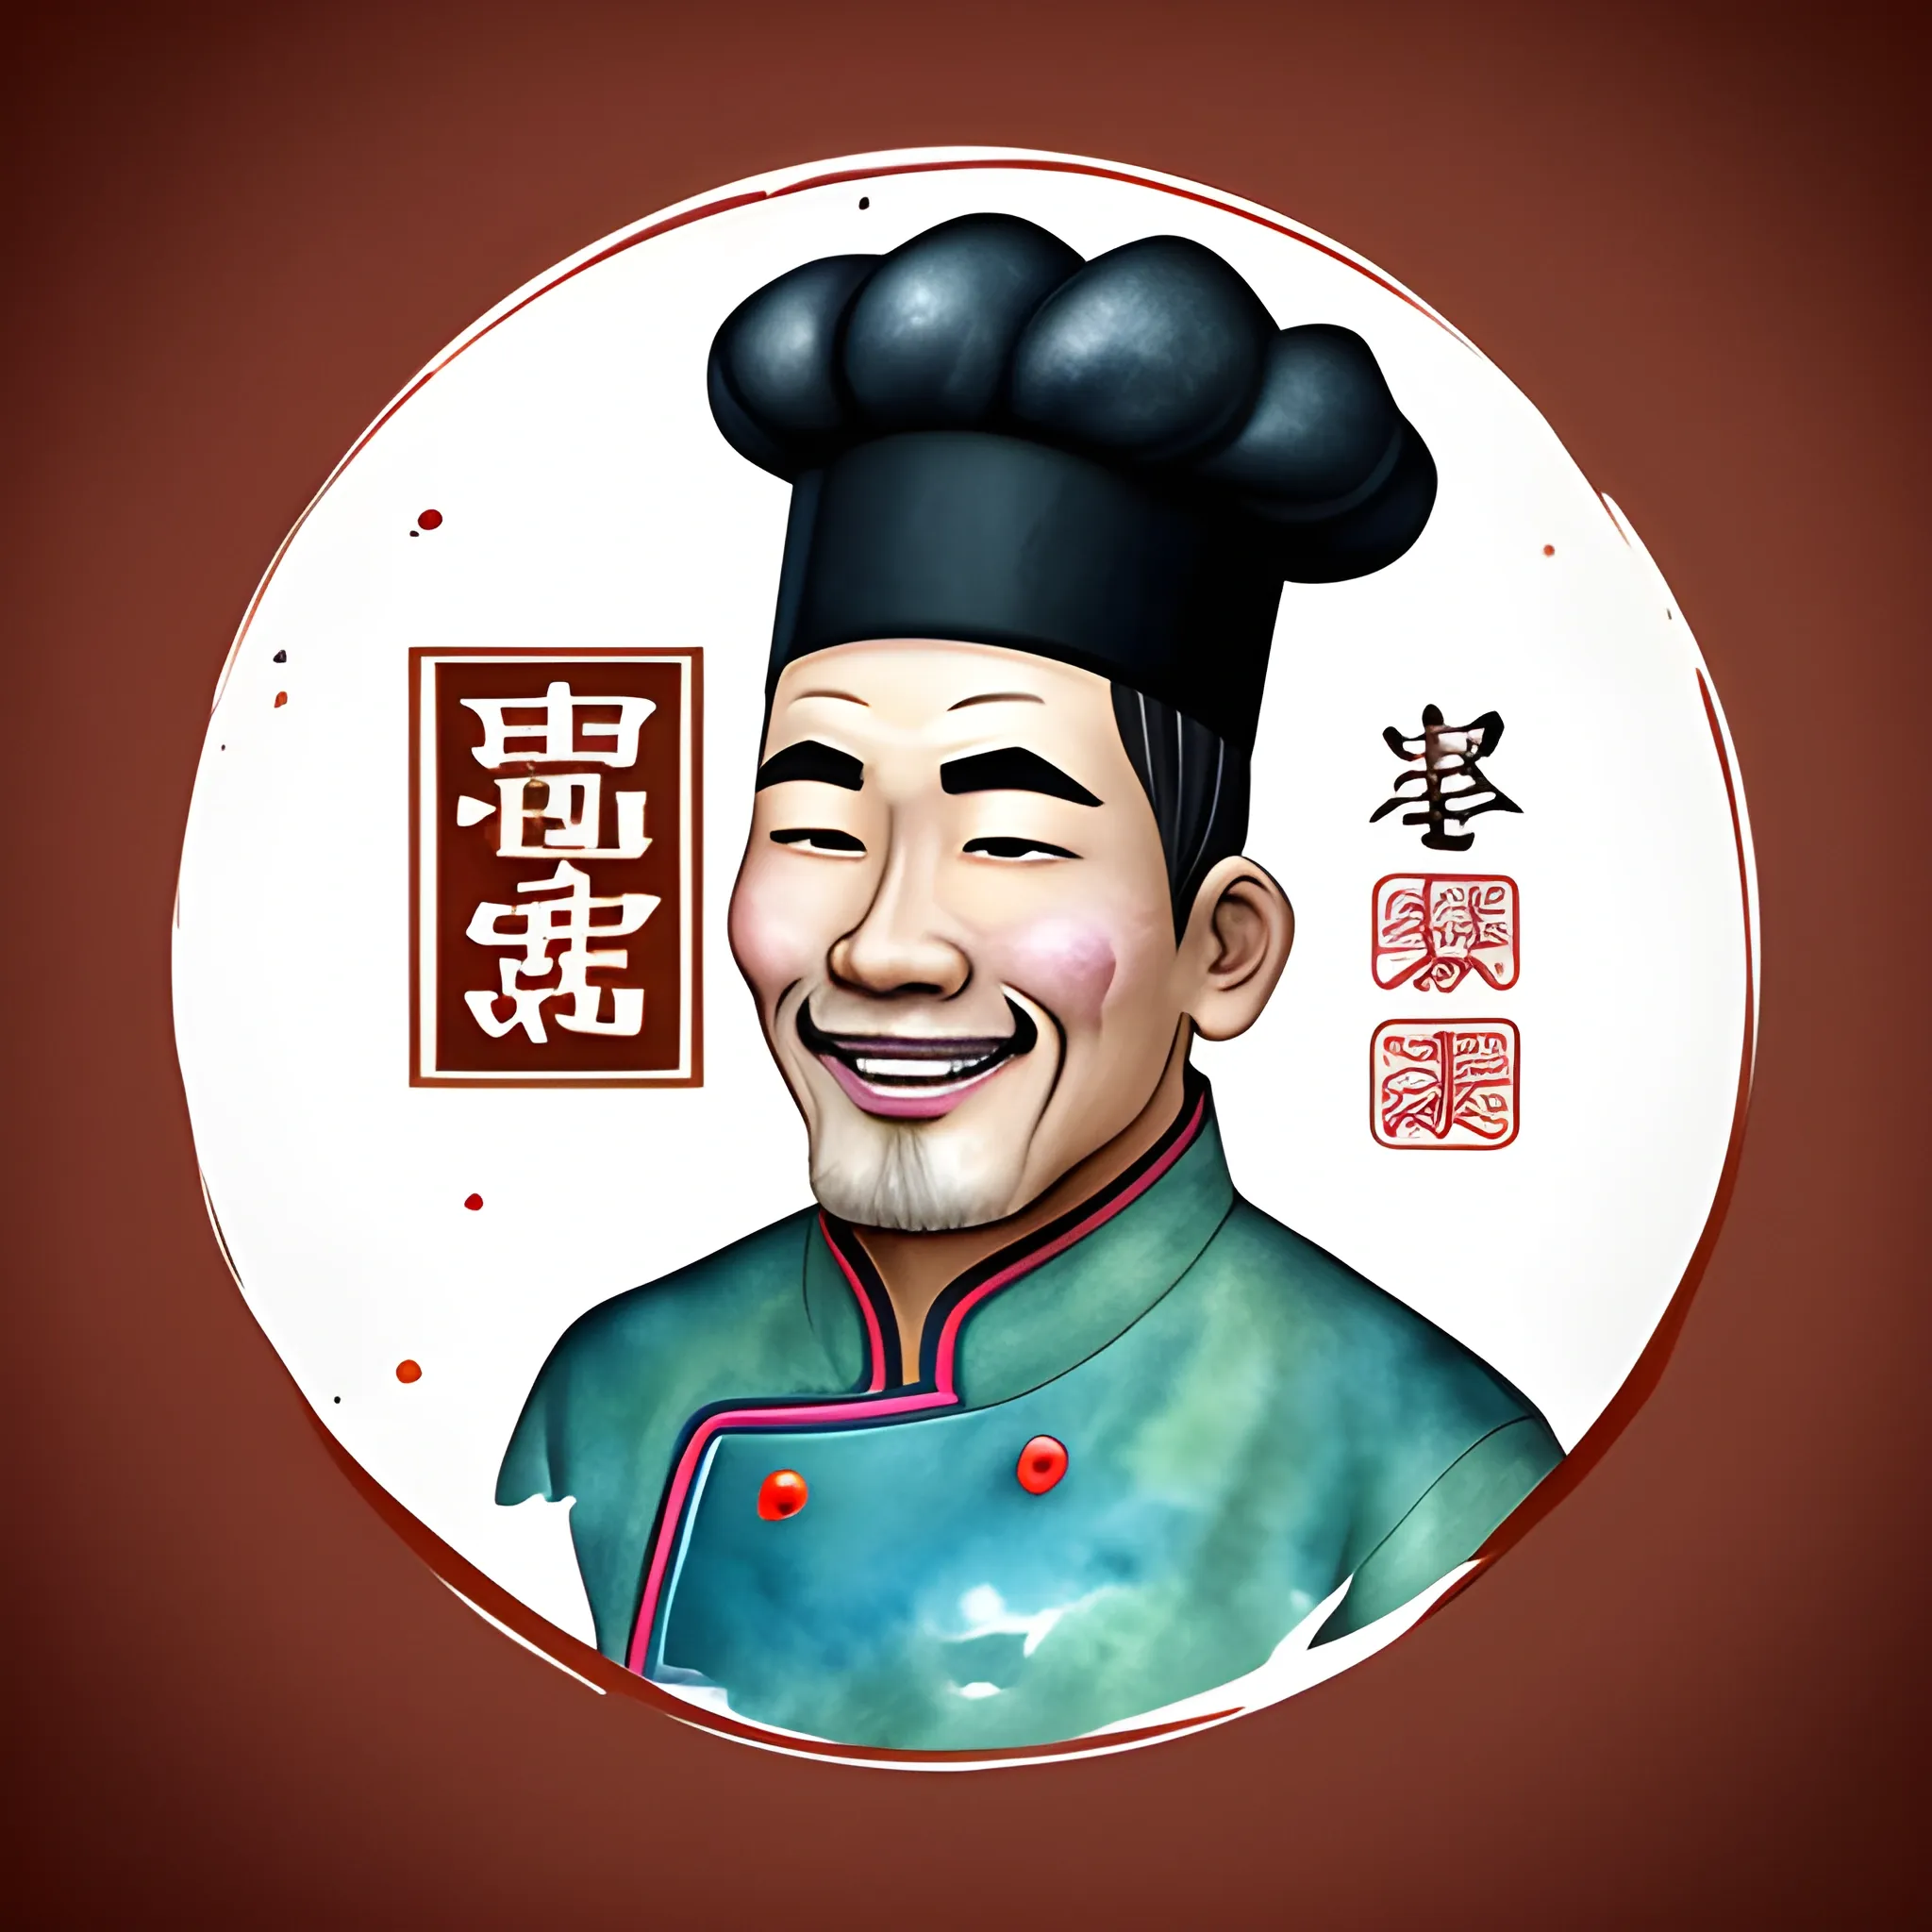 Create a unique and creative logo design for Fong’s Garden. Male chef iconic, wear chef hat, banner text is Fong's Garden place under the logo of head, Black and brown hair, smaile face but no see the teeth. more chinese style overall style. add some food dished around the logo, 3D, Cartoon, Cartoon, 3D, Water Color